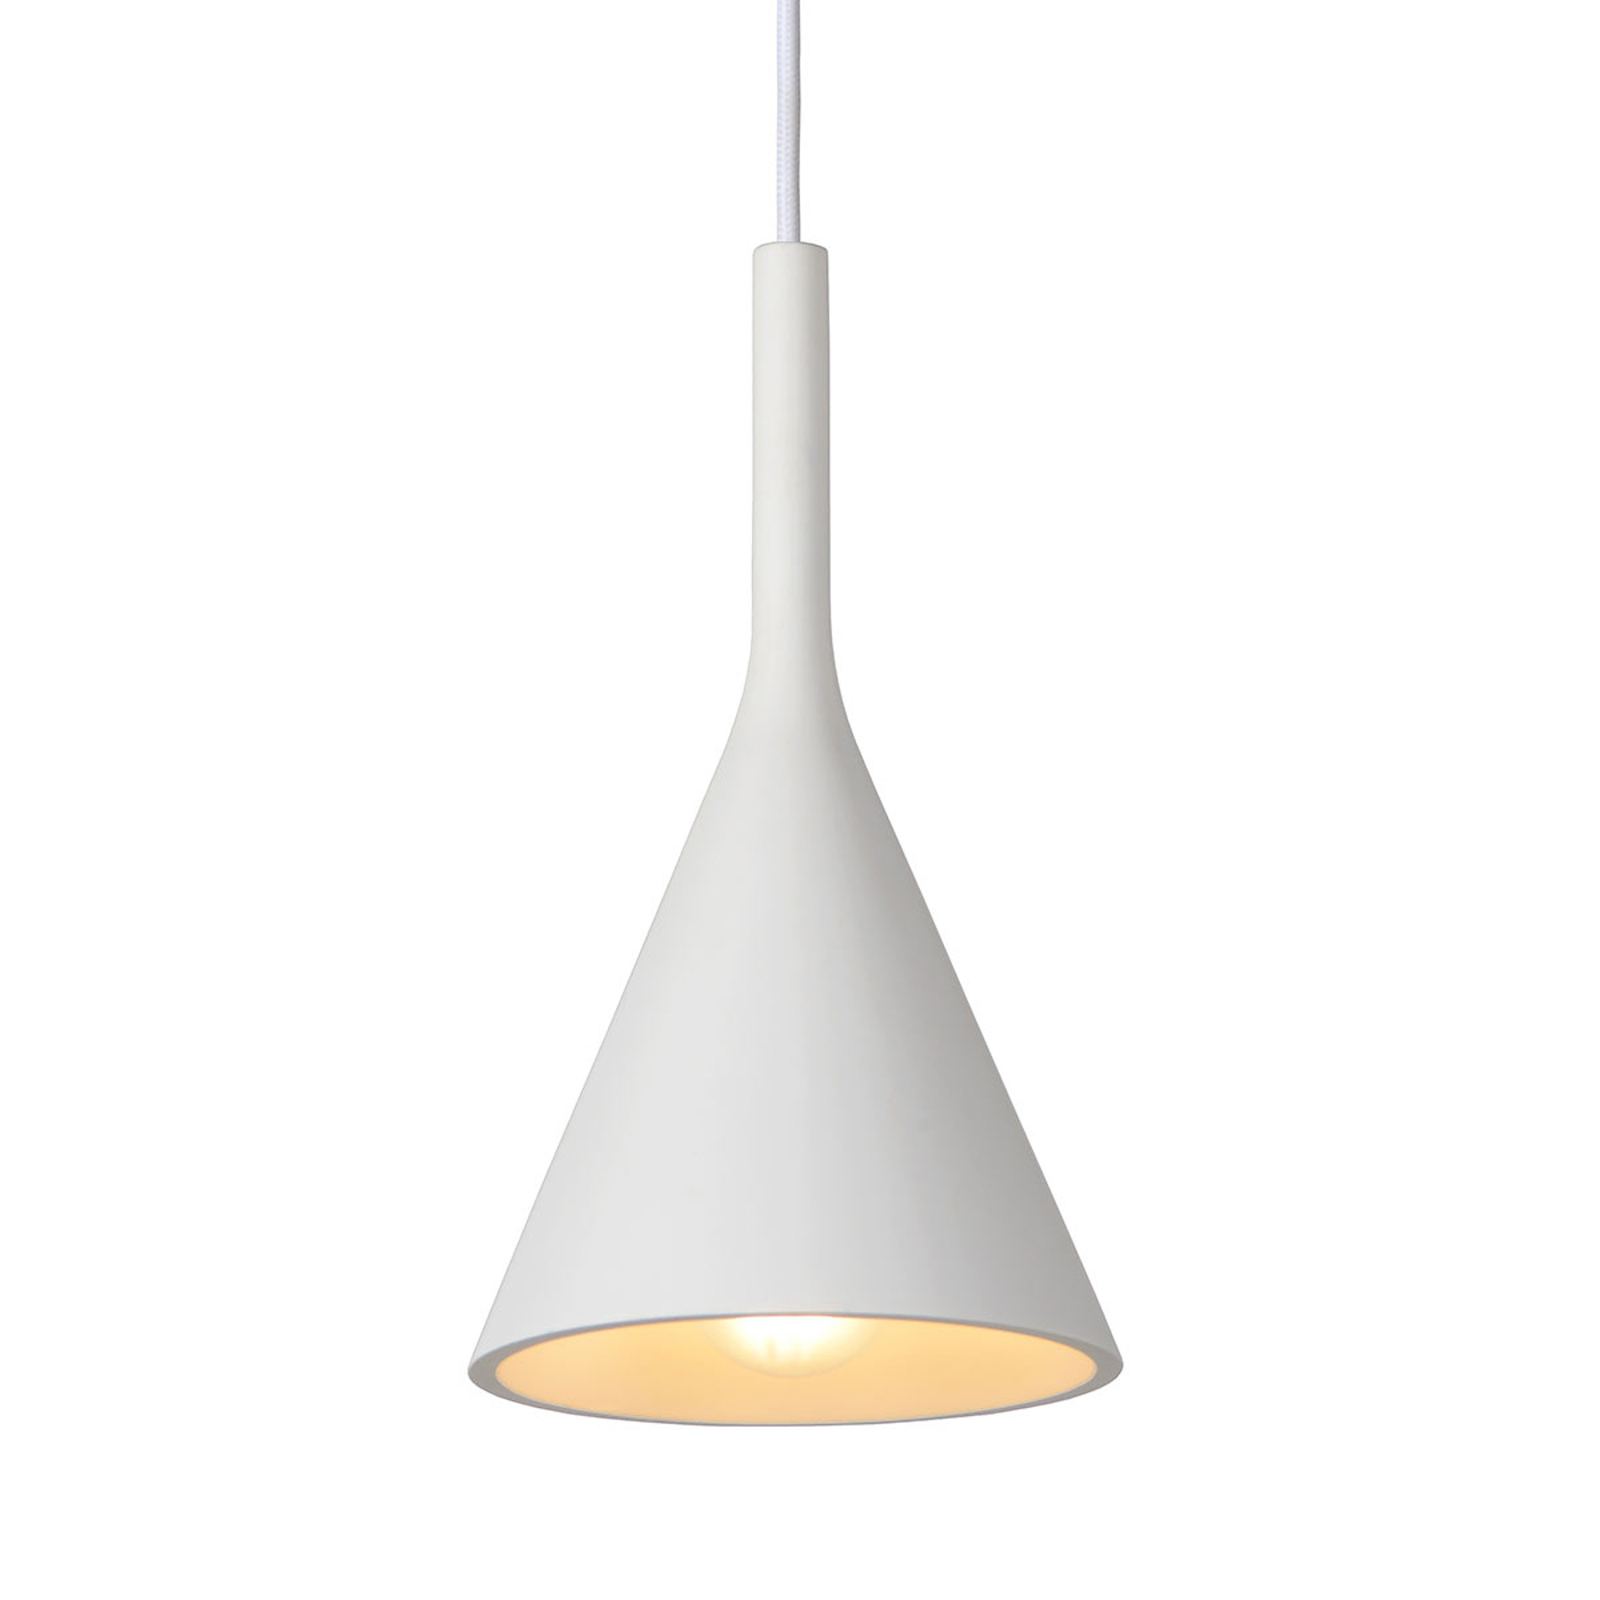 Cone-shaped Gipsy hanging light